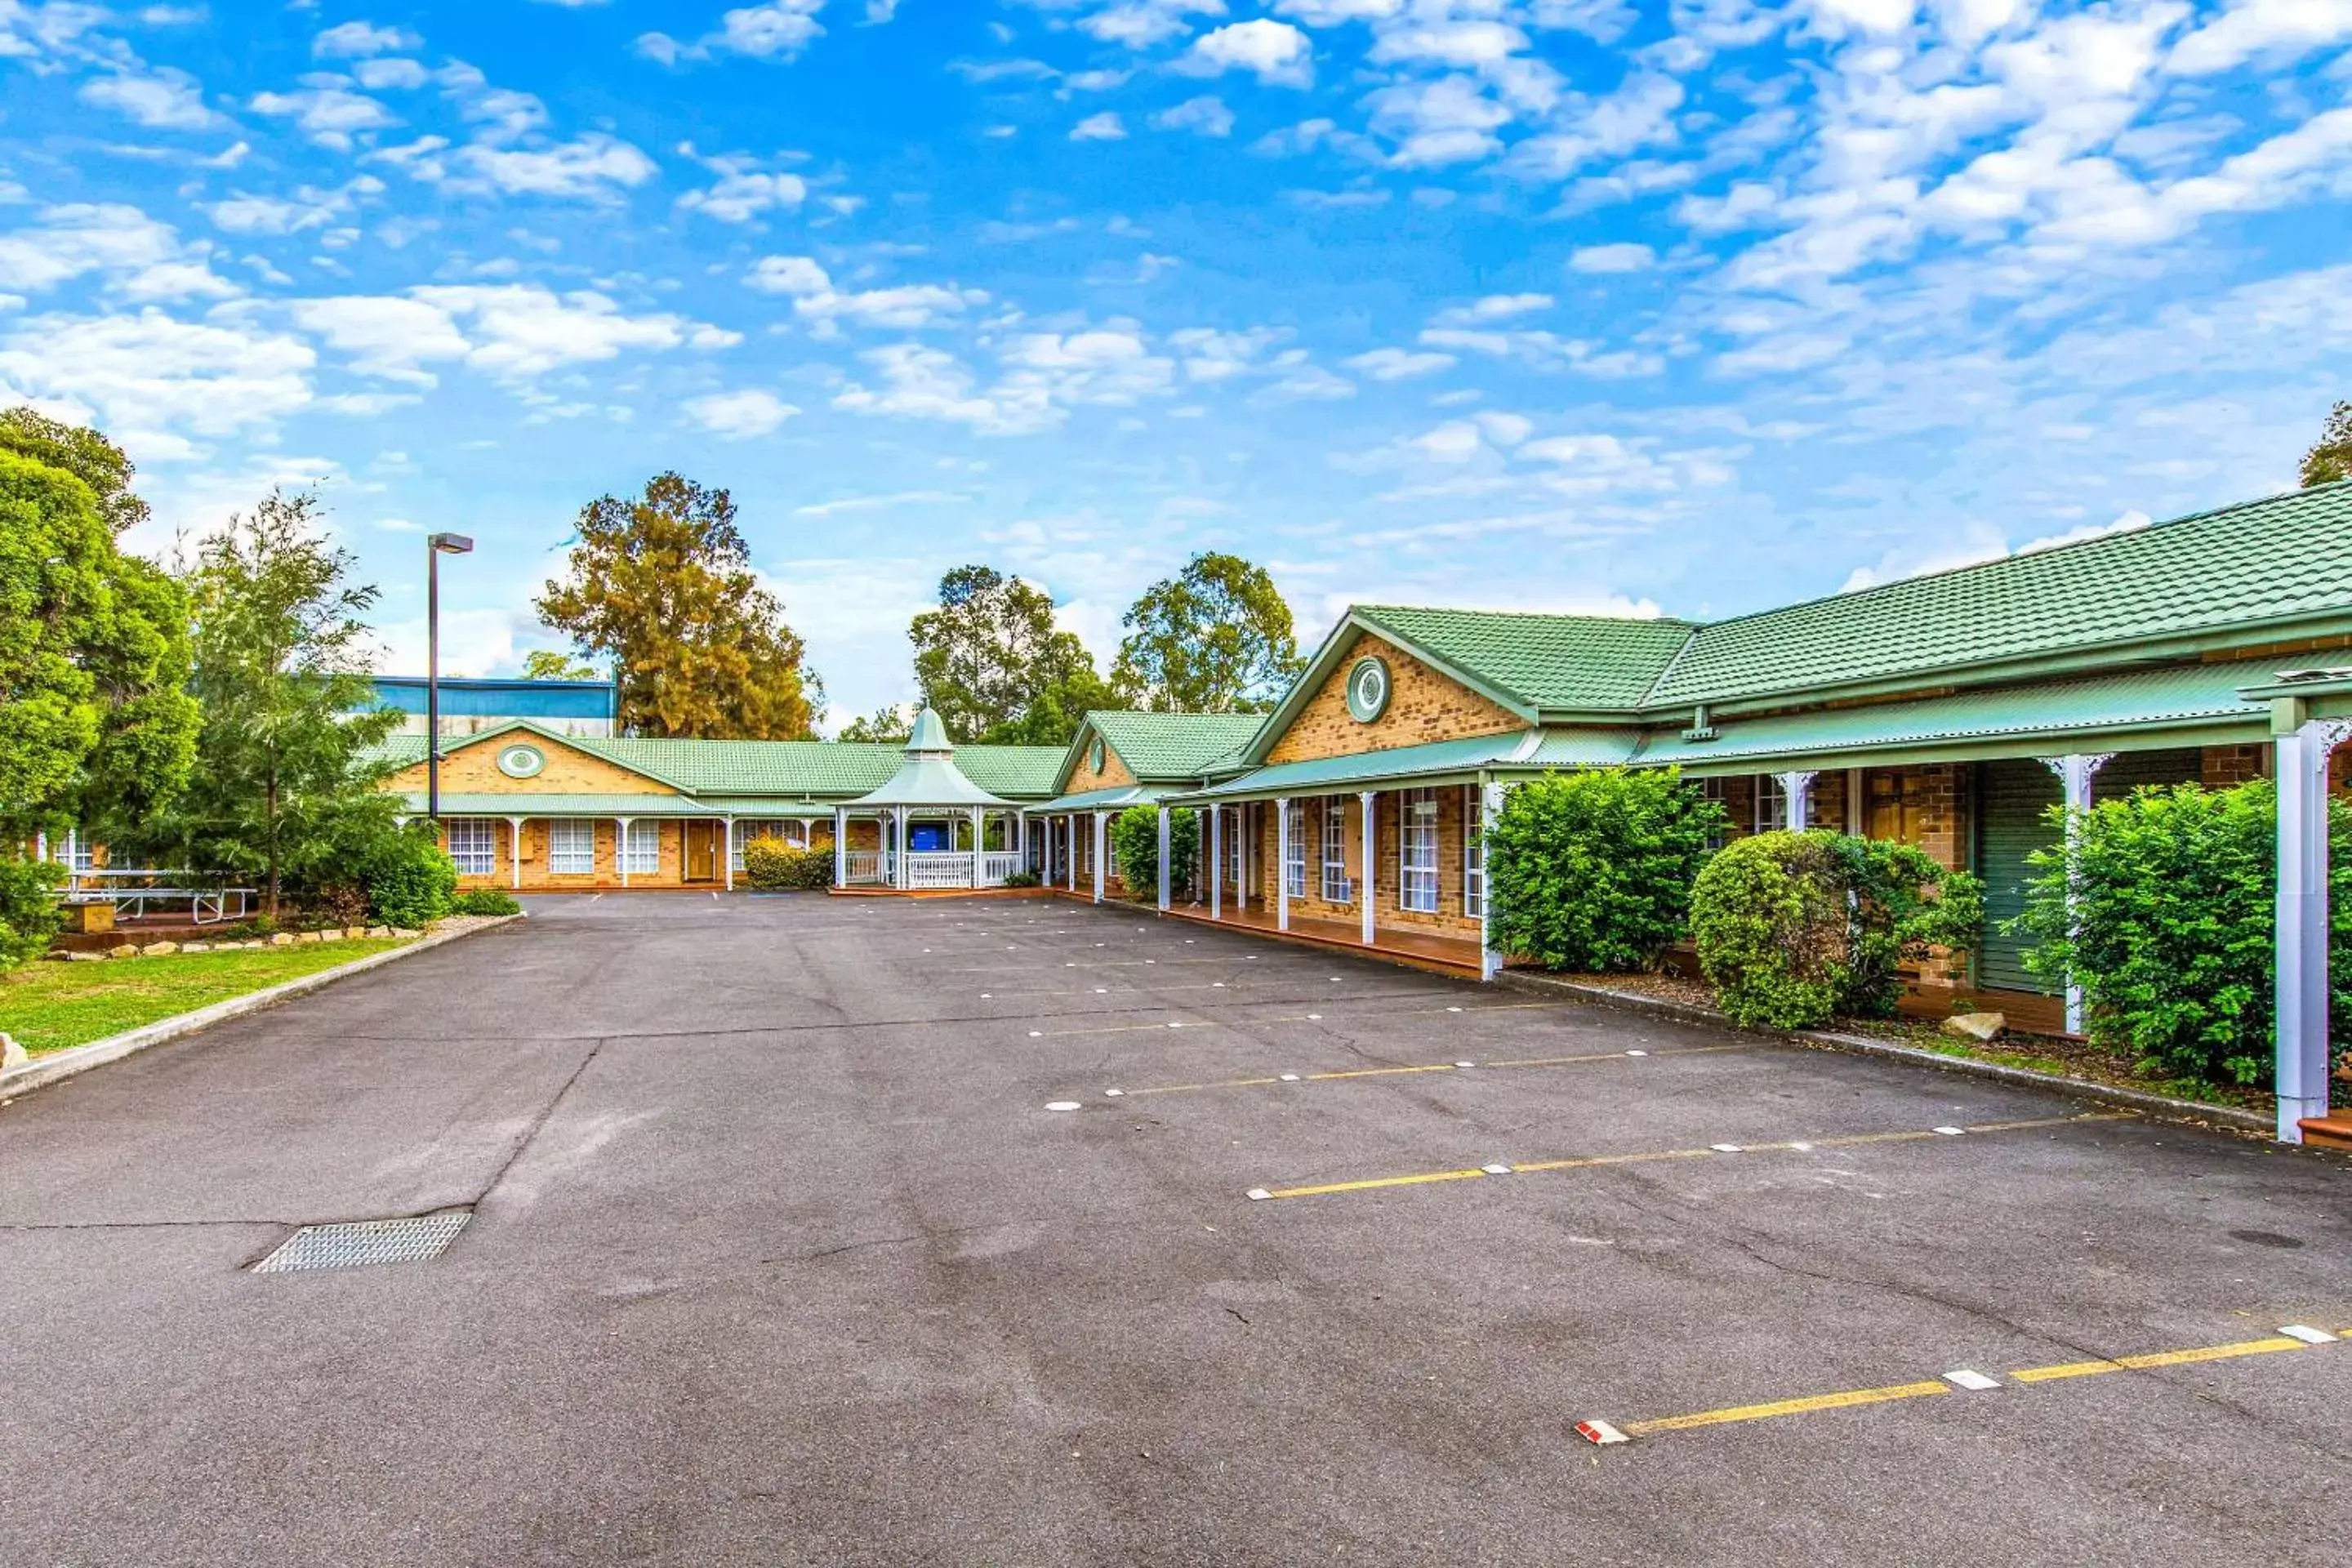 Property Building in Quality Inn Penrith Sydney